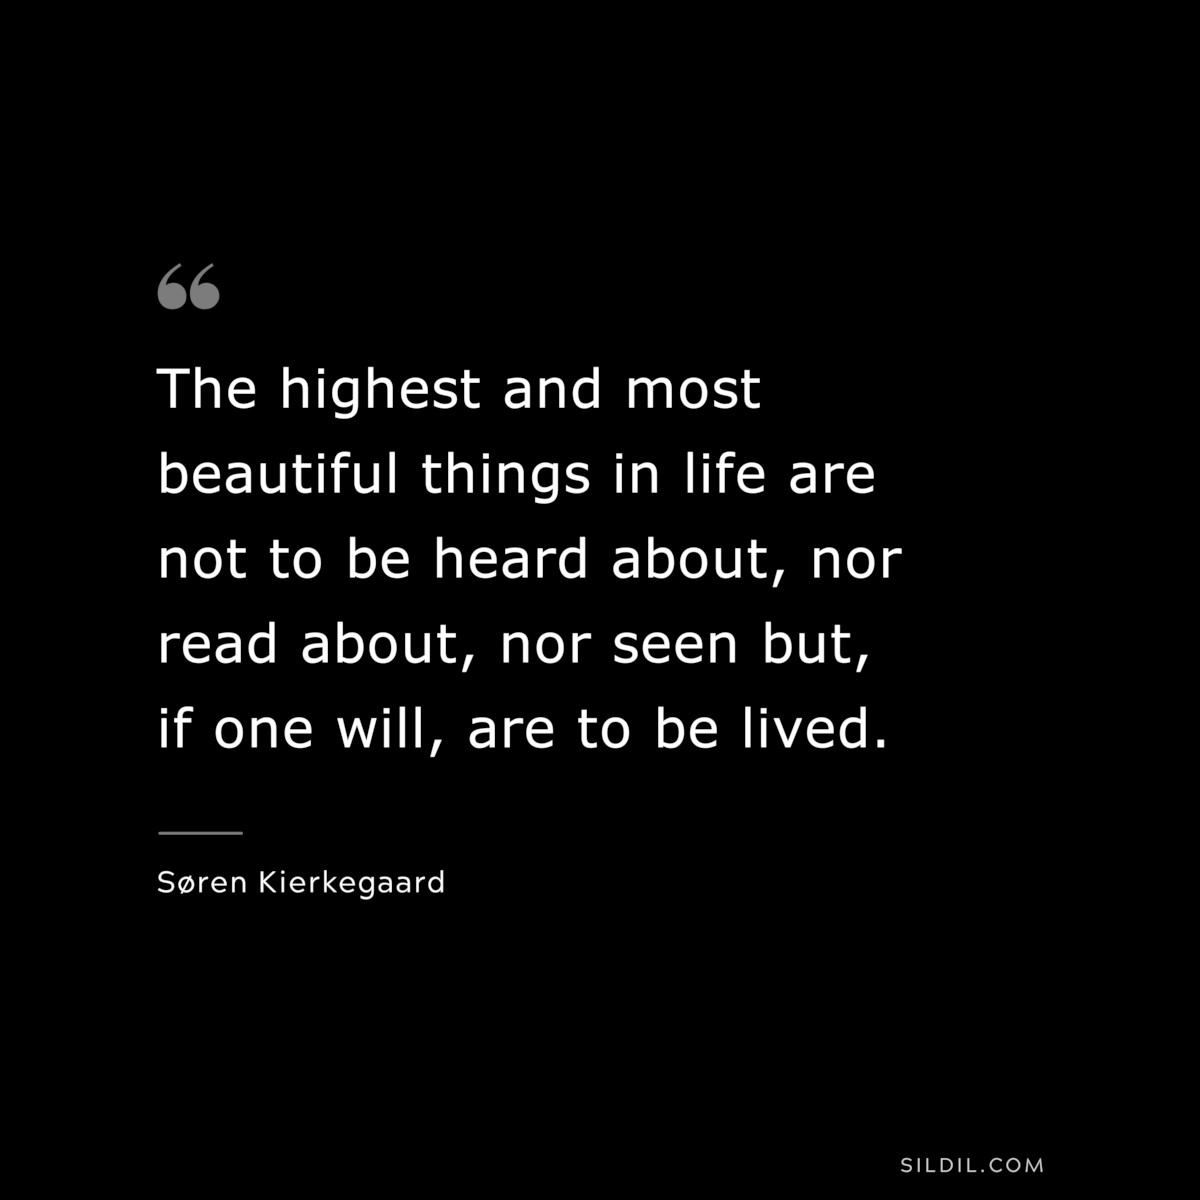 The highest and most beautiful things in life are not to be heard about, nor read about, nor seen but, if one will, are to be lived. ― Søren Kierkegaard